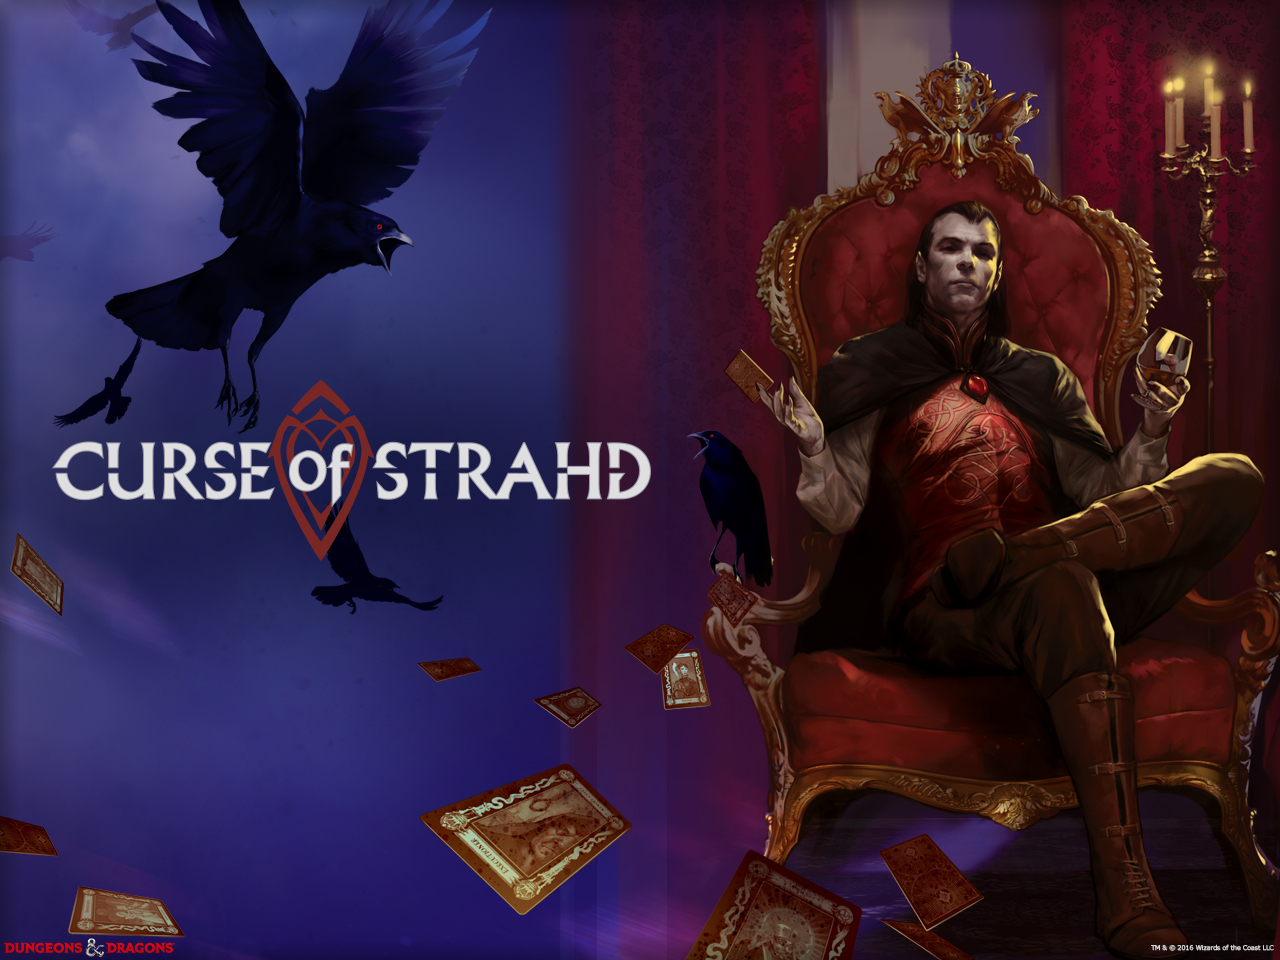 Dungeons  Dragons available the new expansion The Curse of Strahd